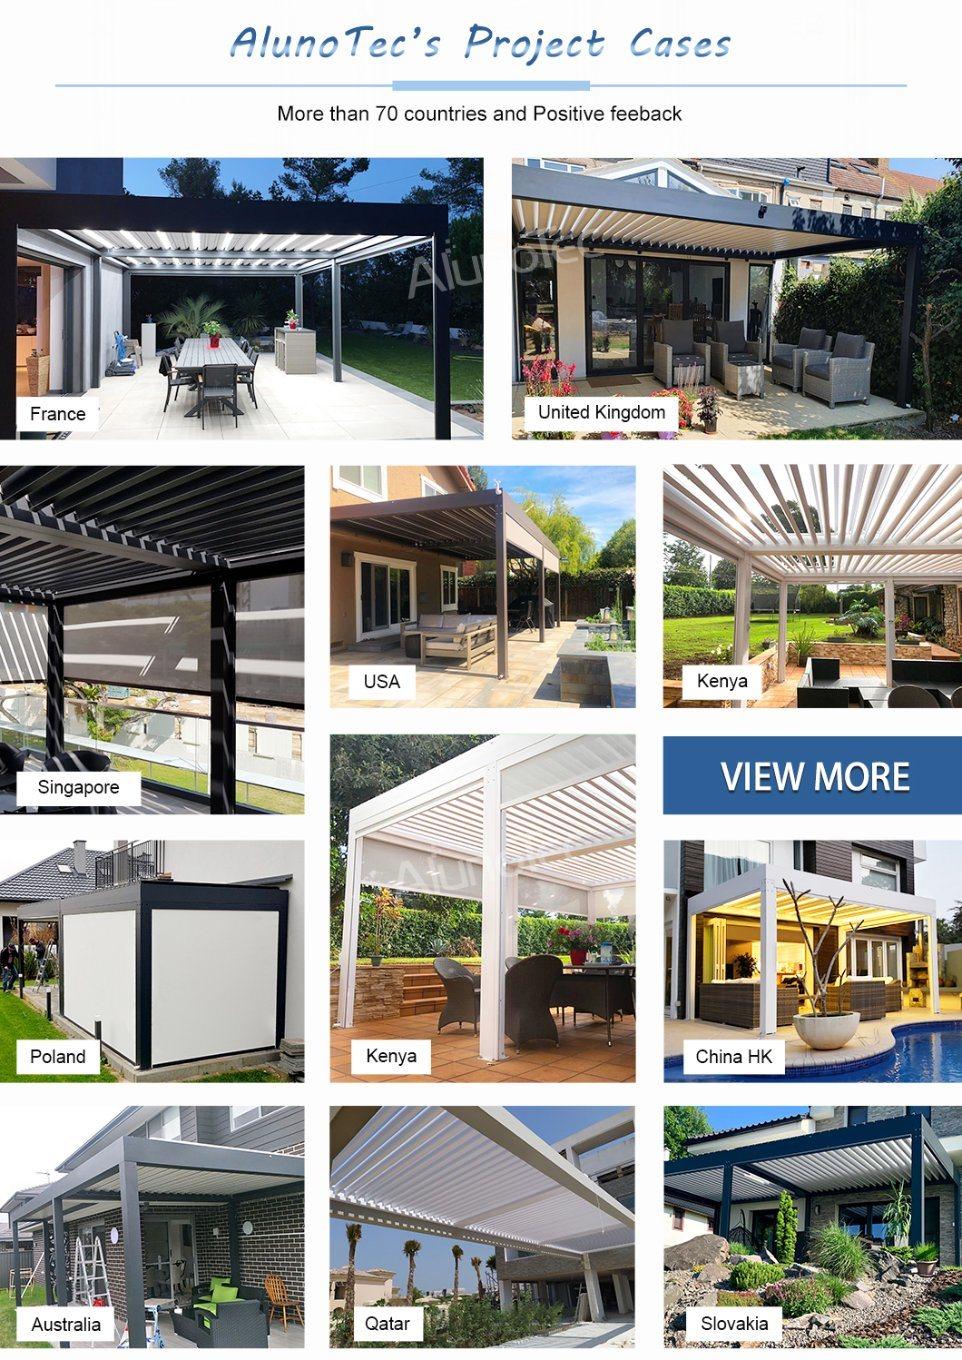 Pergola Closing Louver Roof System Motorised Louvres for Decking